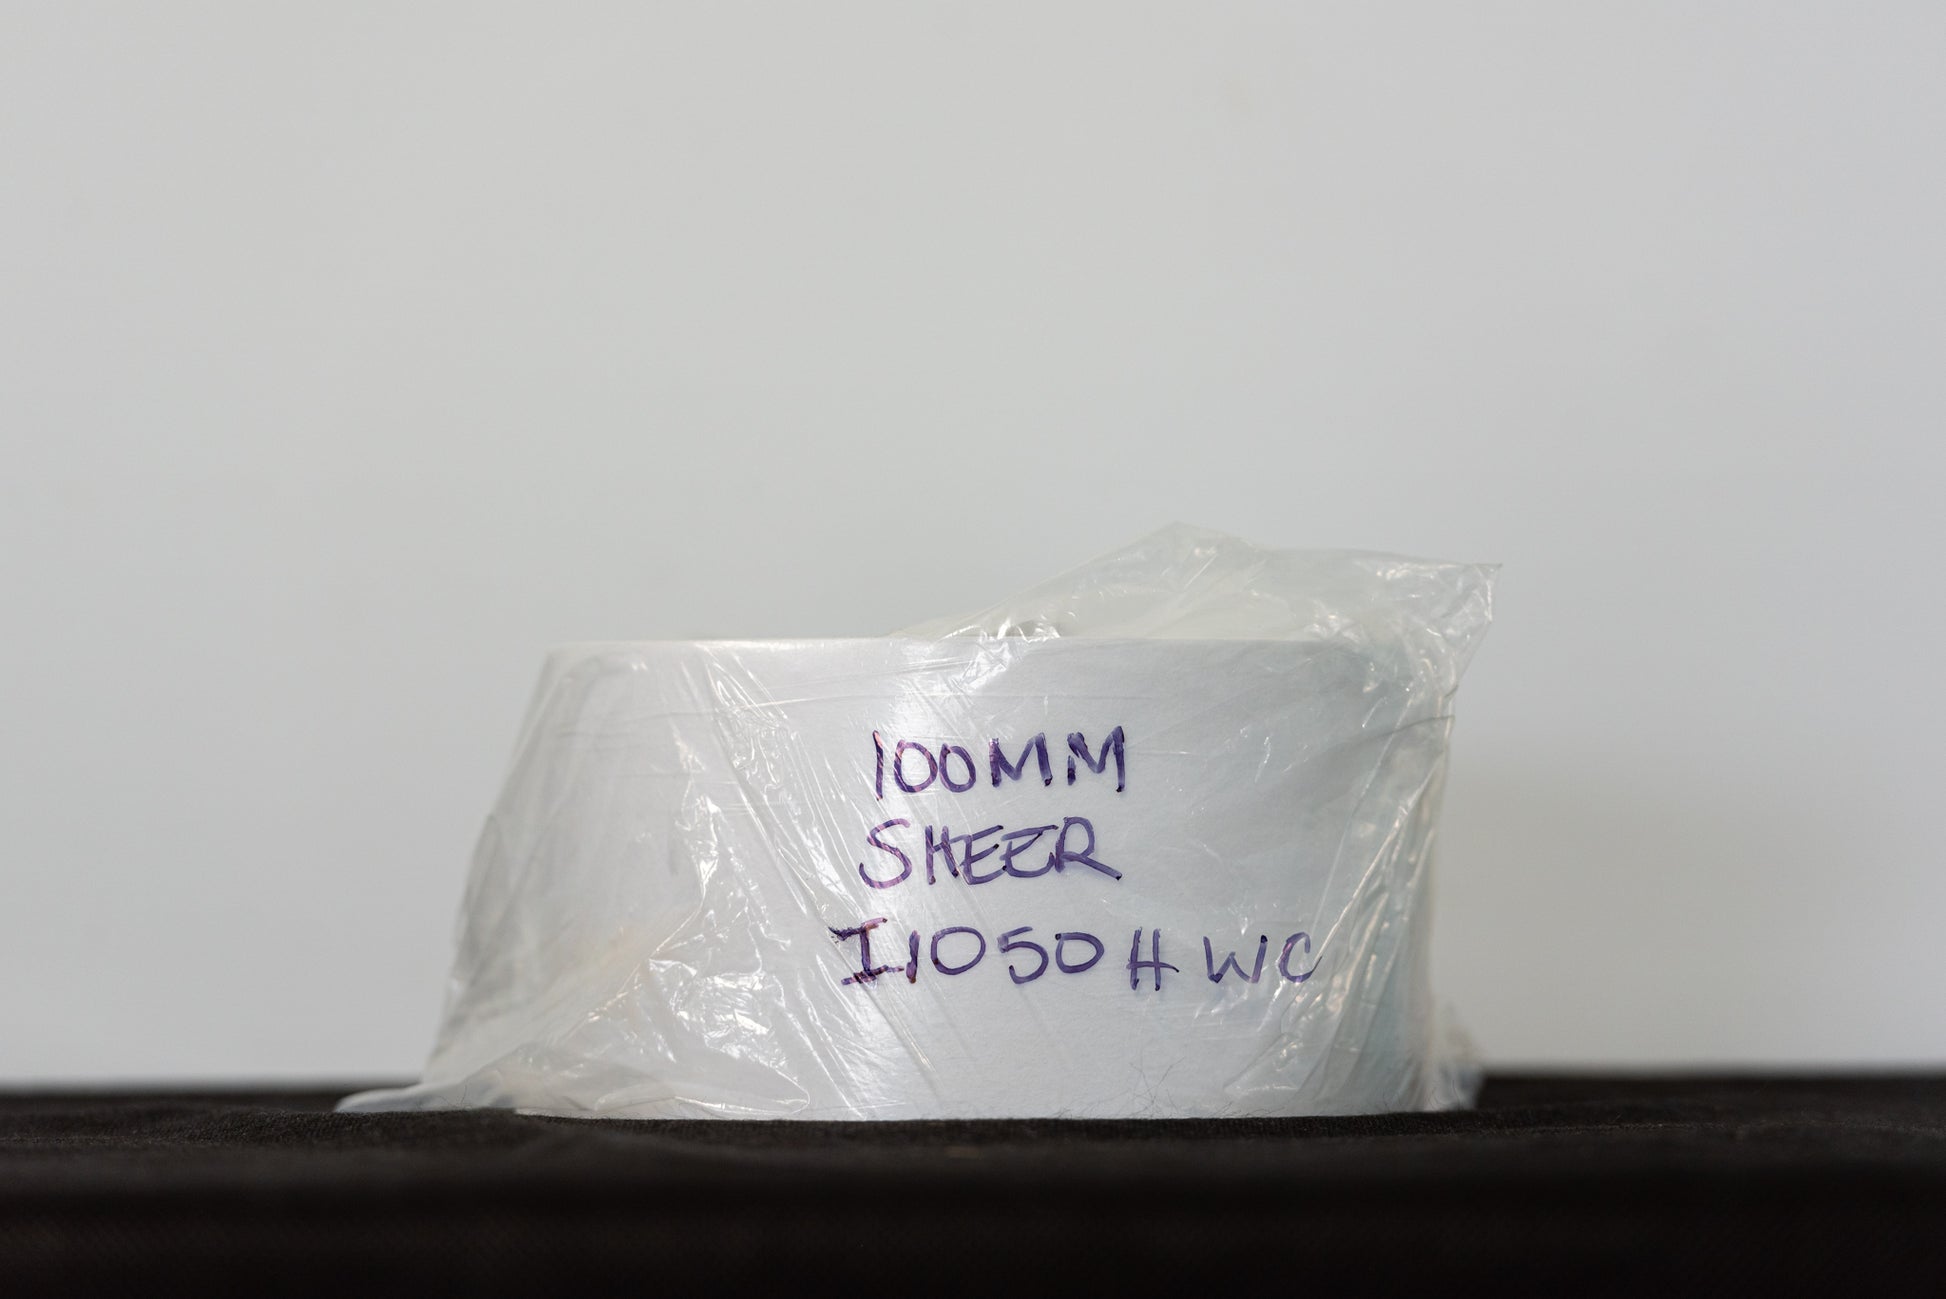 100mm sheer curtain tape rolls for sewing 